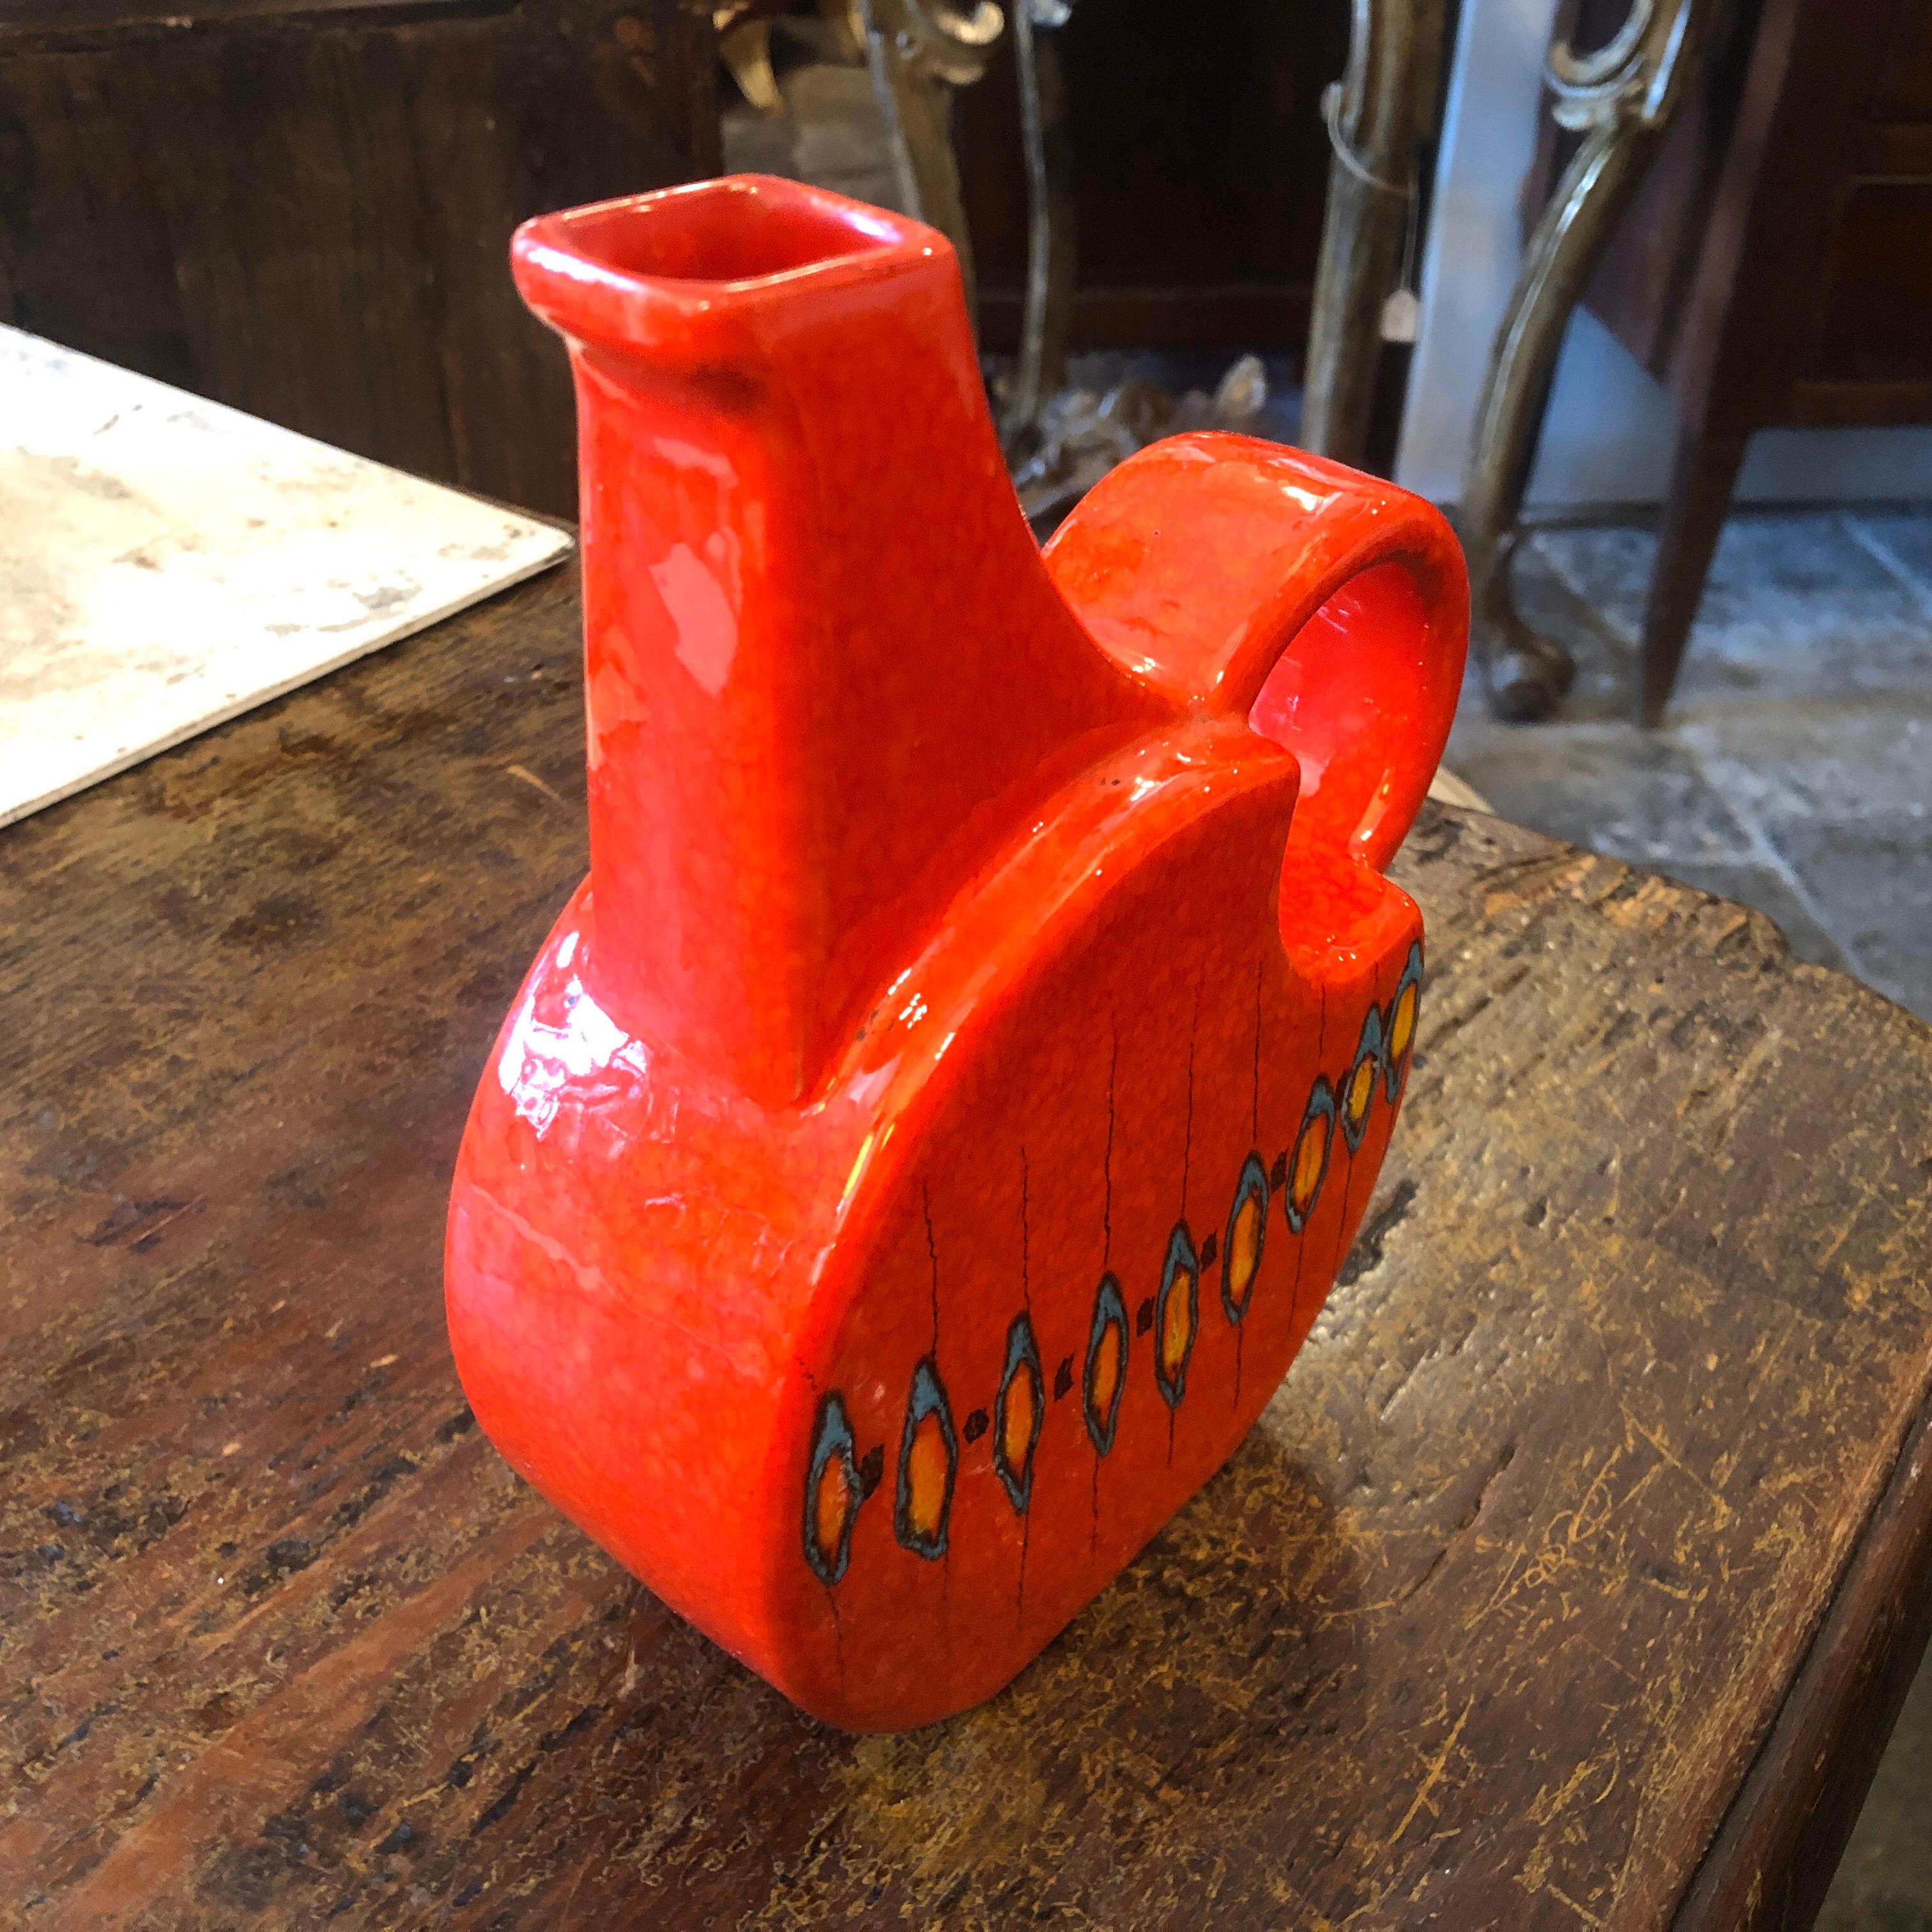 A Memphis style Italian Jug by Bertoncello, the red ceramic jug is in perfect conditions.